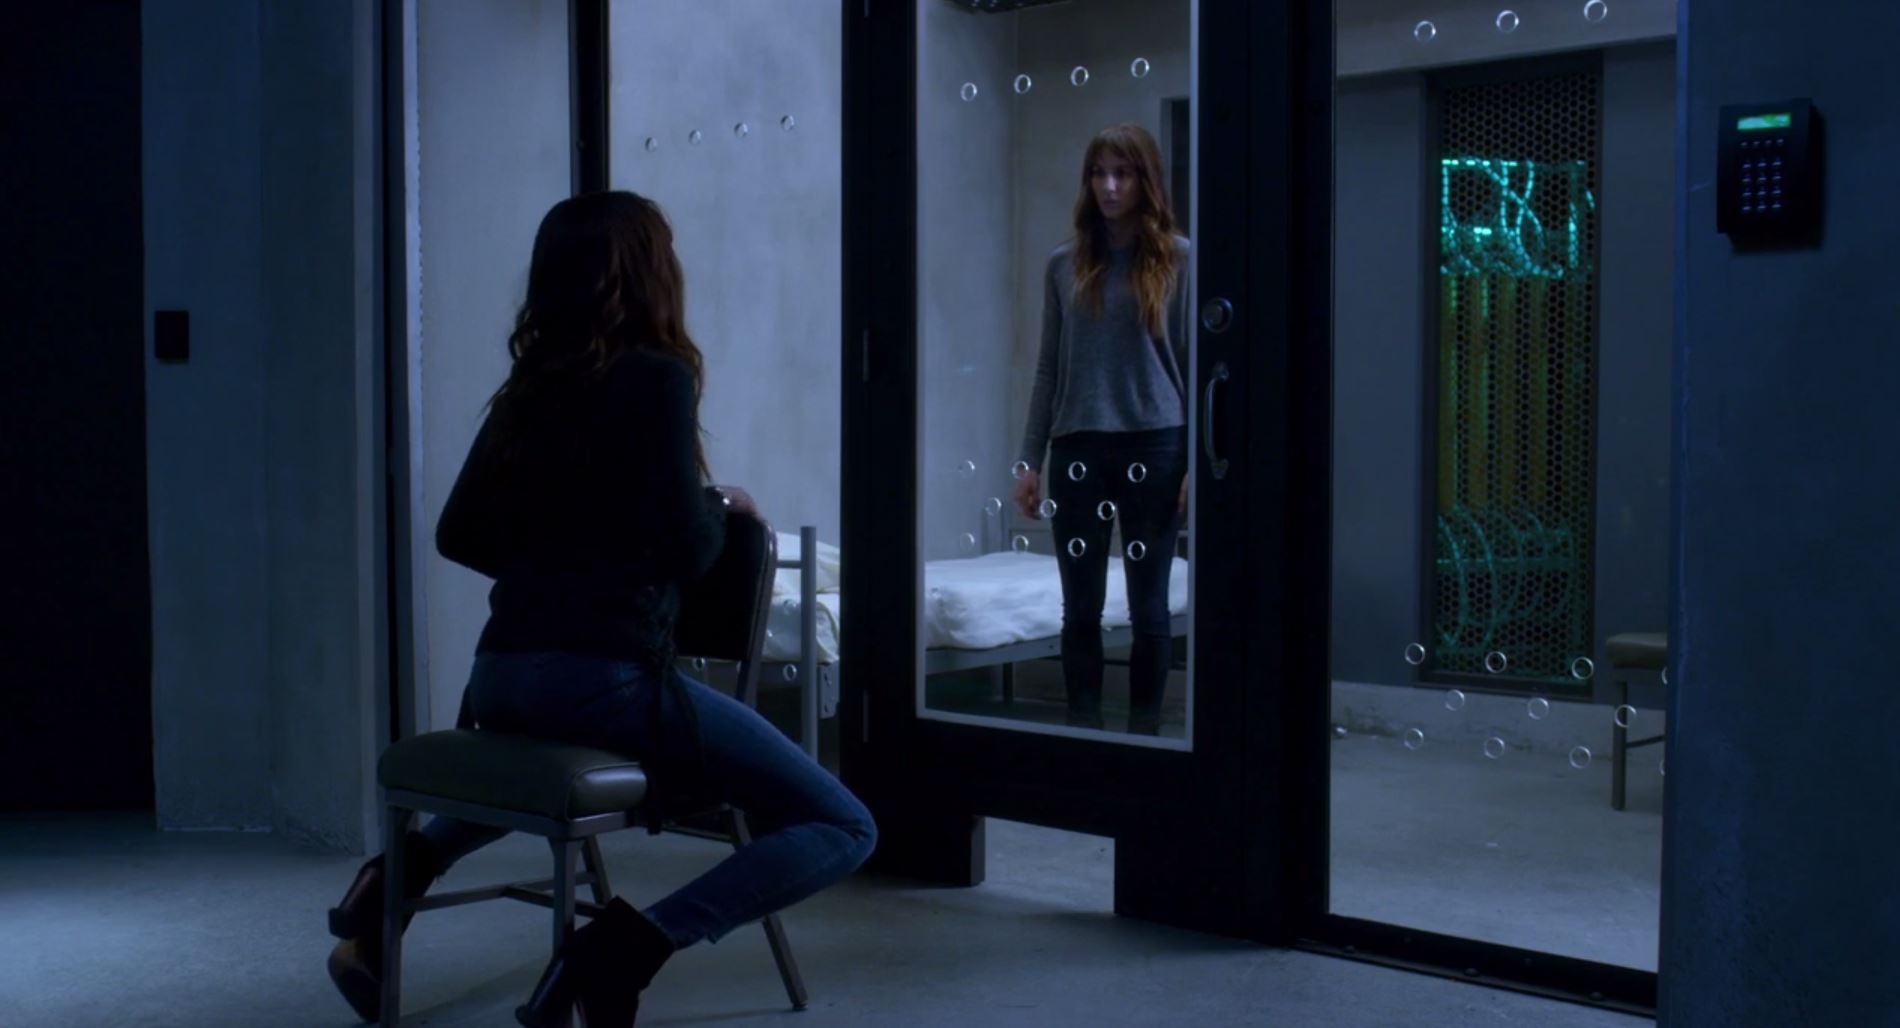 Spencer looks through a glass door at her twin sitting in a chair